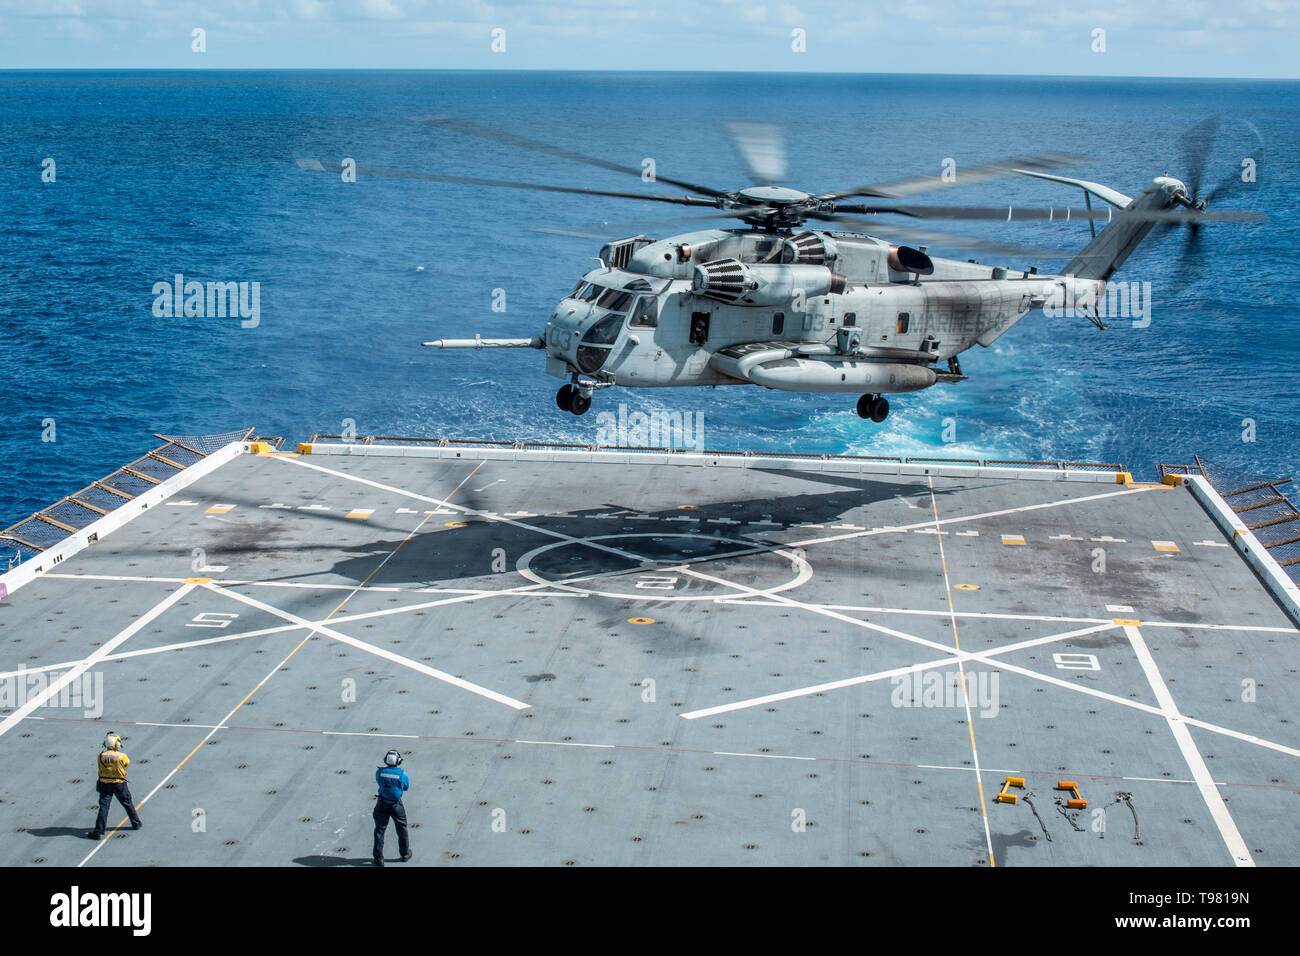 190513-M-QS181-0061 PACIFIC OCEAN (May 13, 2019) U.S. Marines with Marine Aircraft Group (MAG) 24 prepare to land a CH-53 Super Stallion on the flight deck of the San Antonio-class amphibious transport dock ship USS John P. Murtha (LPD 26). The Marines and Sailors of the 11th Marine Expeditionary Unit are conducting routine operations as part of the Boxer Amphibious Ready Group. (U.S. Marine Corps photo by Cpl. Jason Monty) Stock Photo